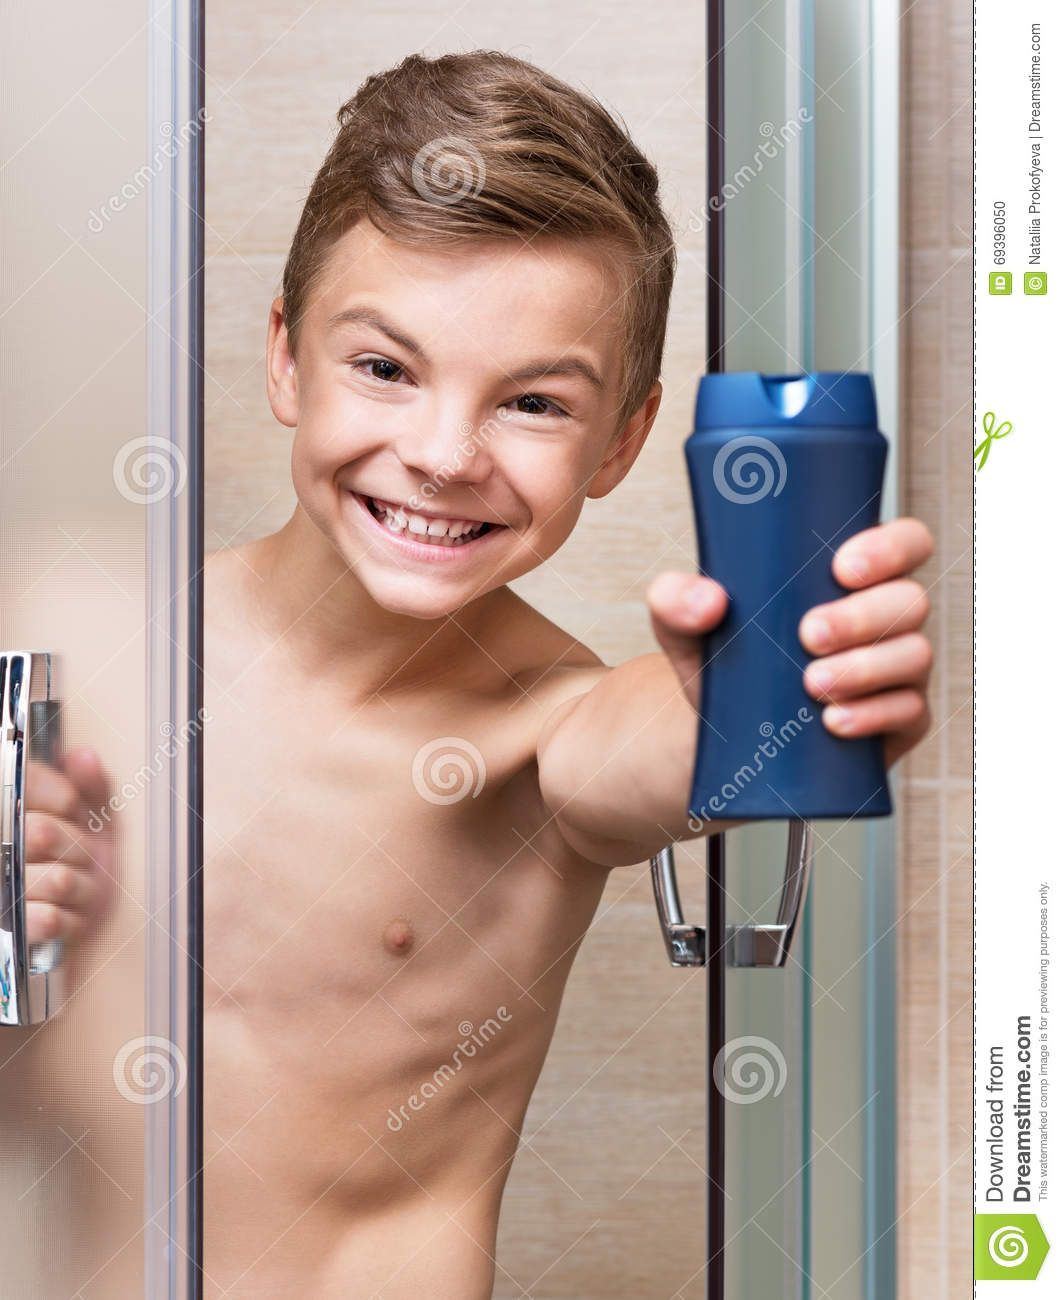 Nut reccomend Young boy shower